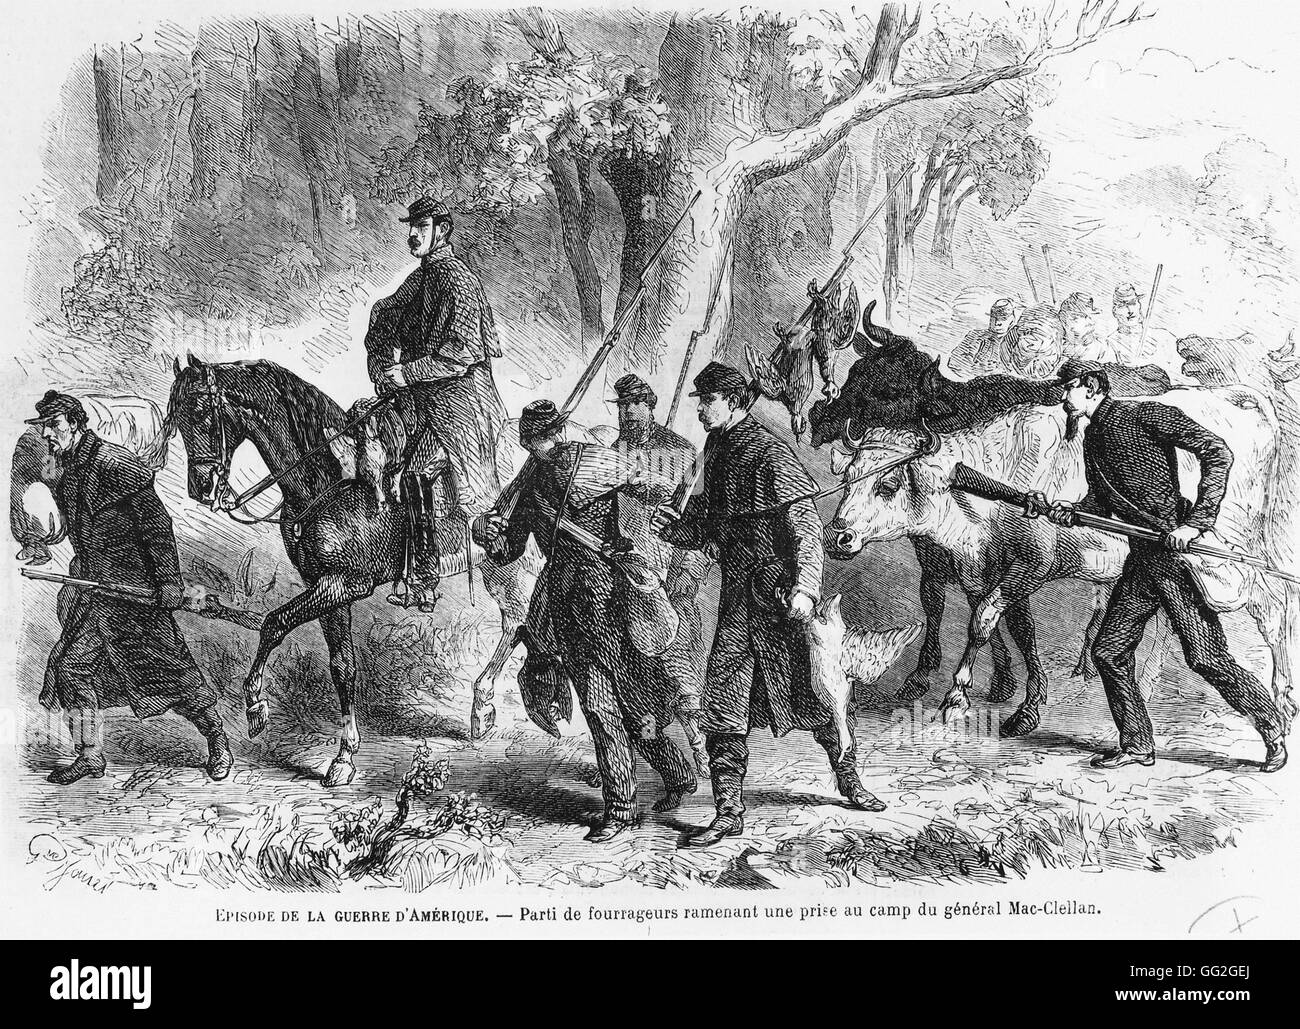 The Civil War: hunters bringing back their catch to the camp of General George Brinton McClellan (riding). 1861-1865 Engraving Stock Photo